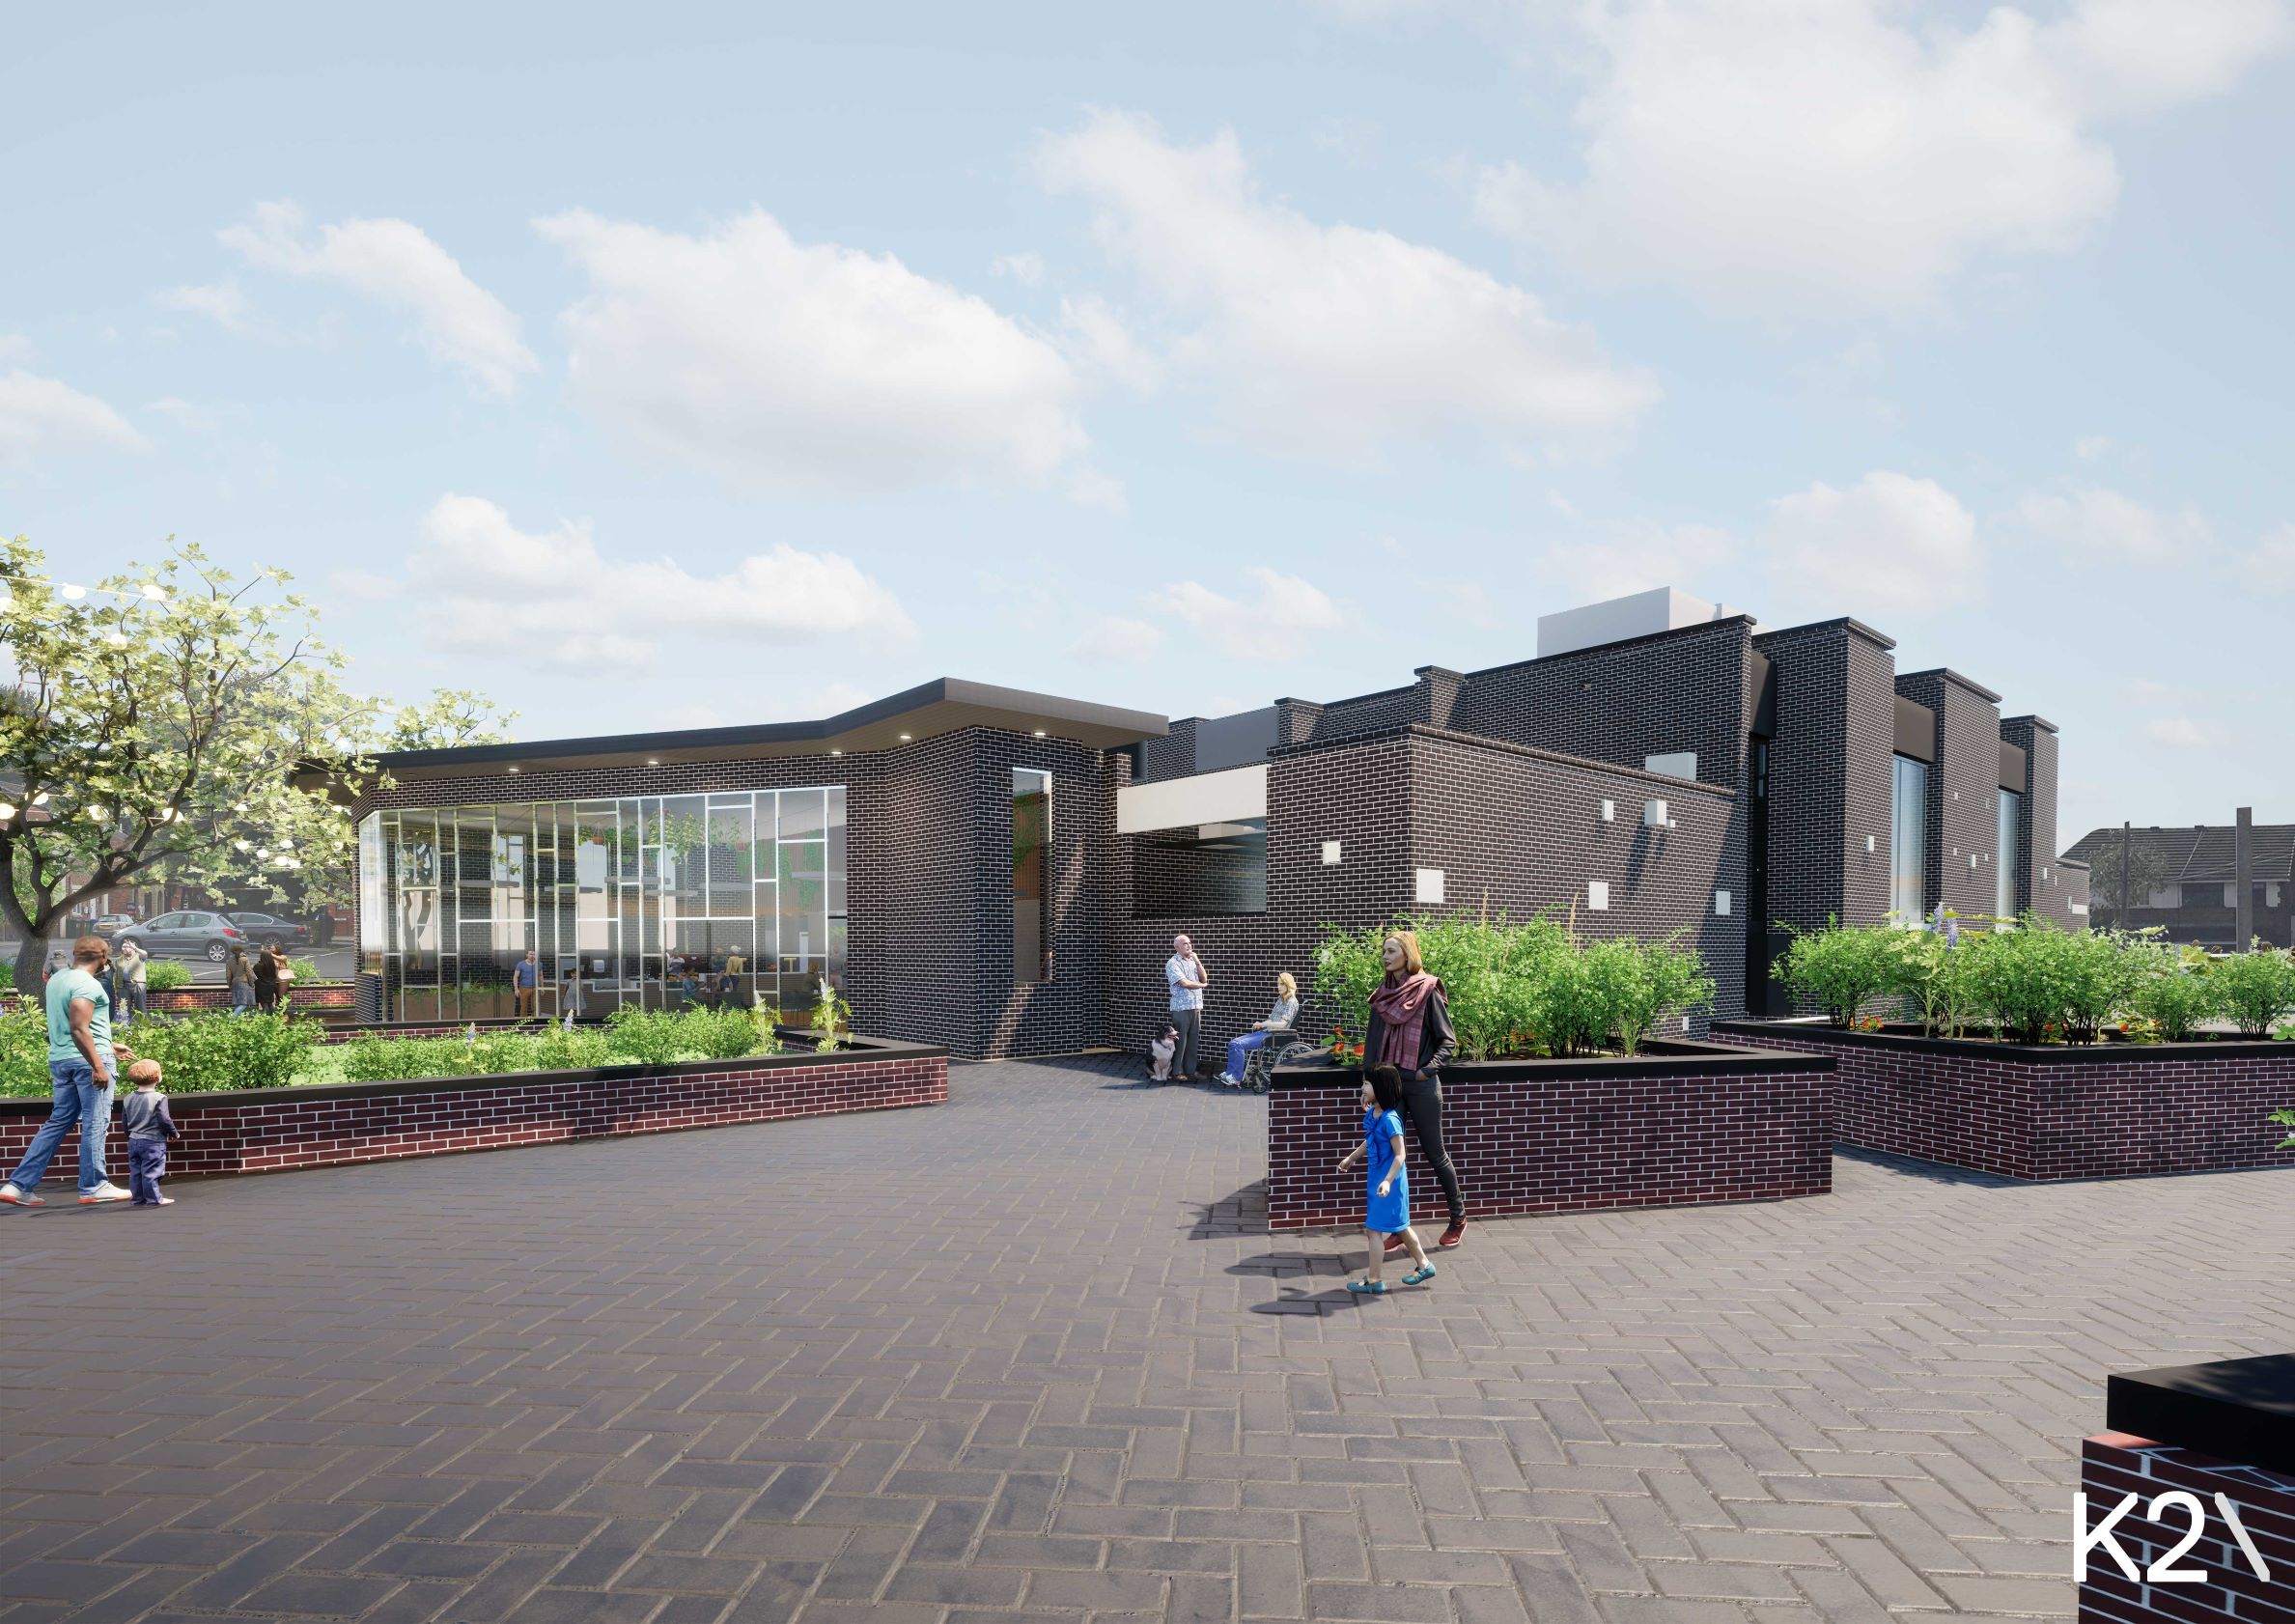 Image: Council agrees additional funding boost for Heywood Civic Centre